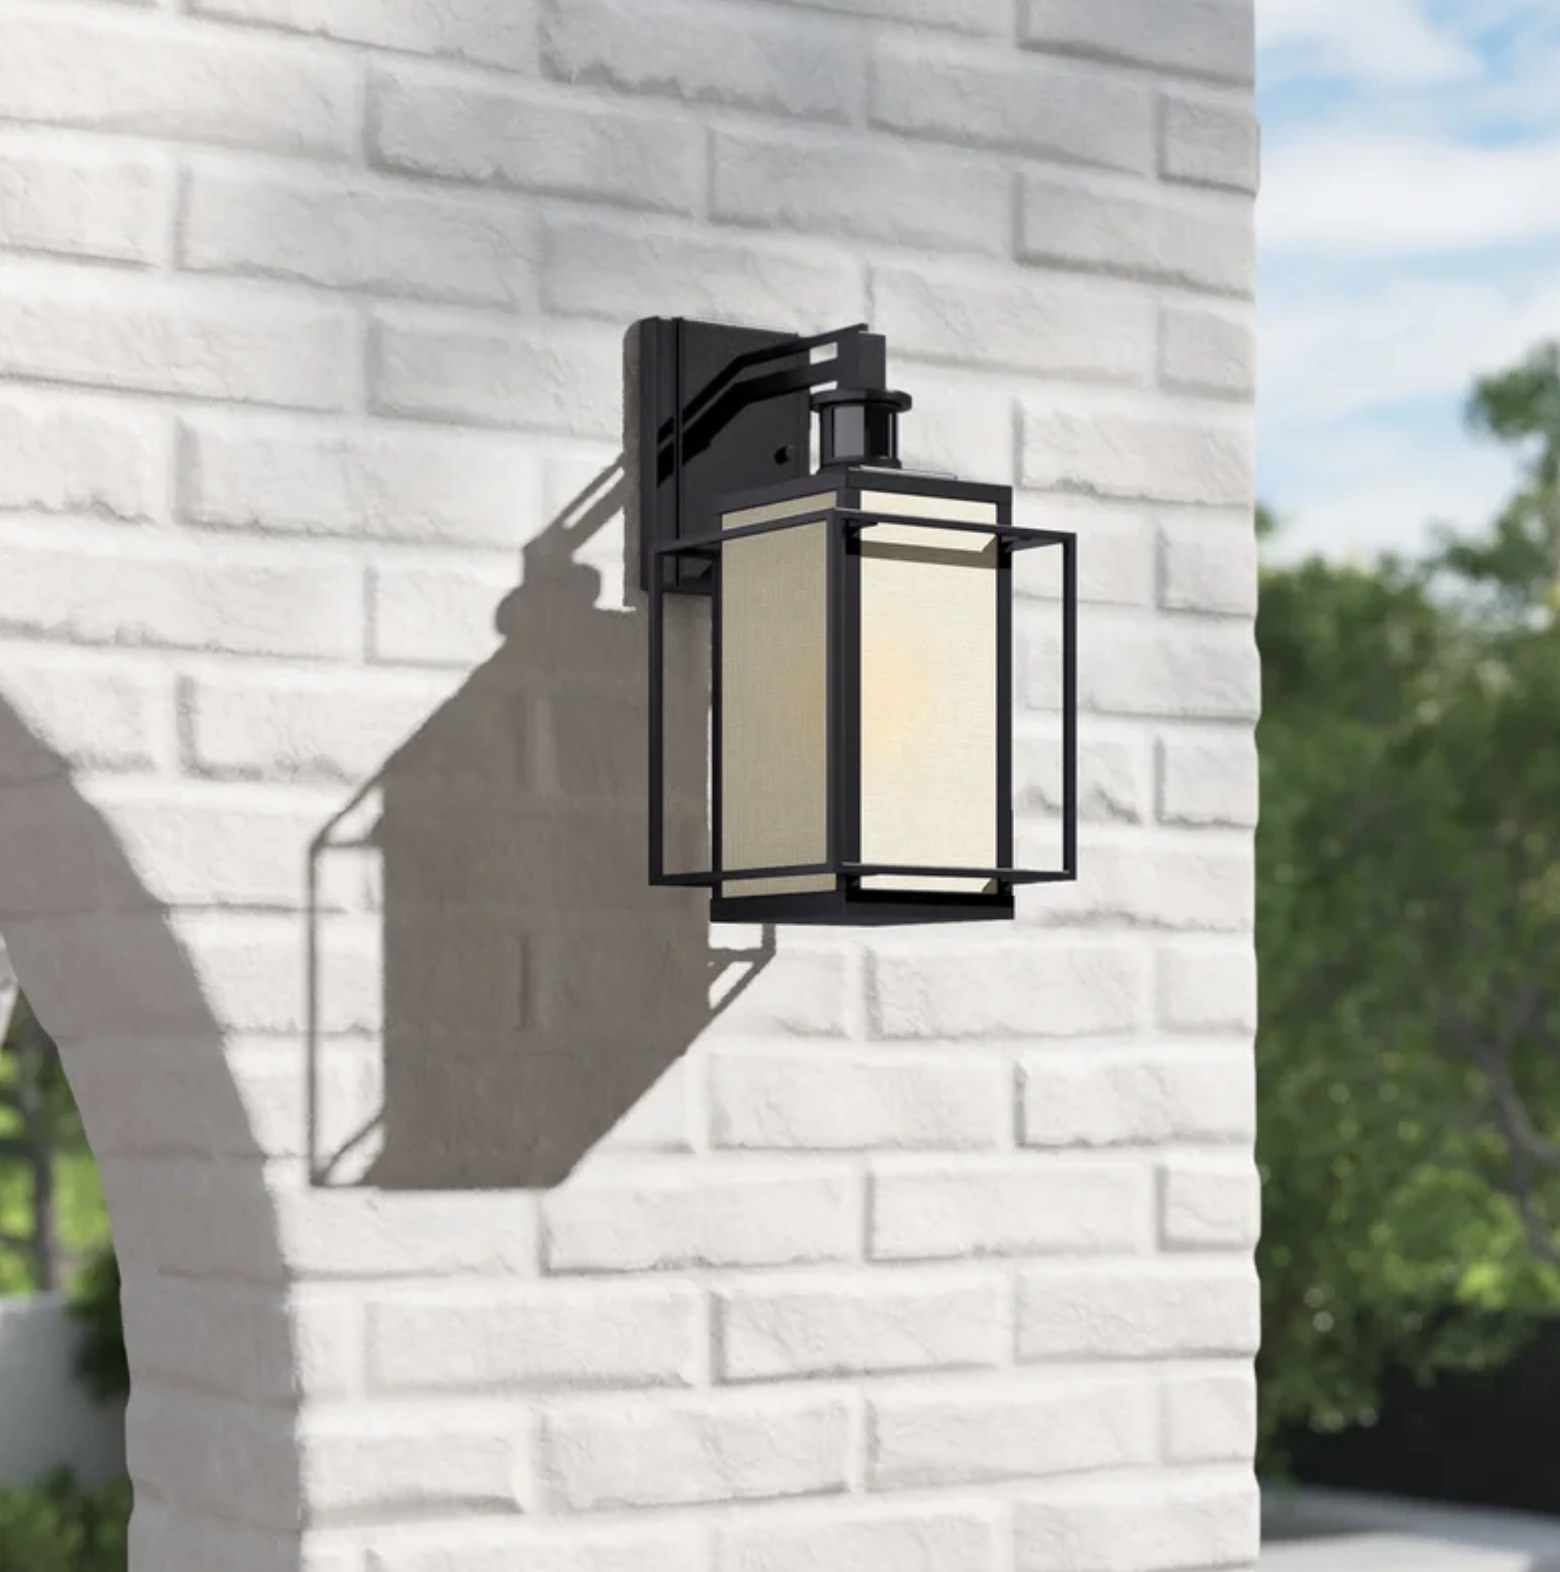 The lantern hanging from a brick wall